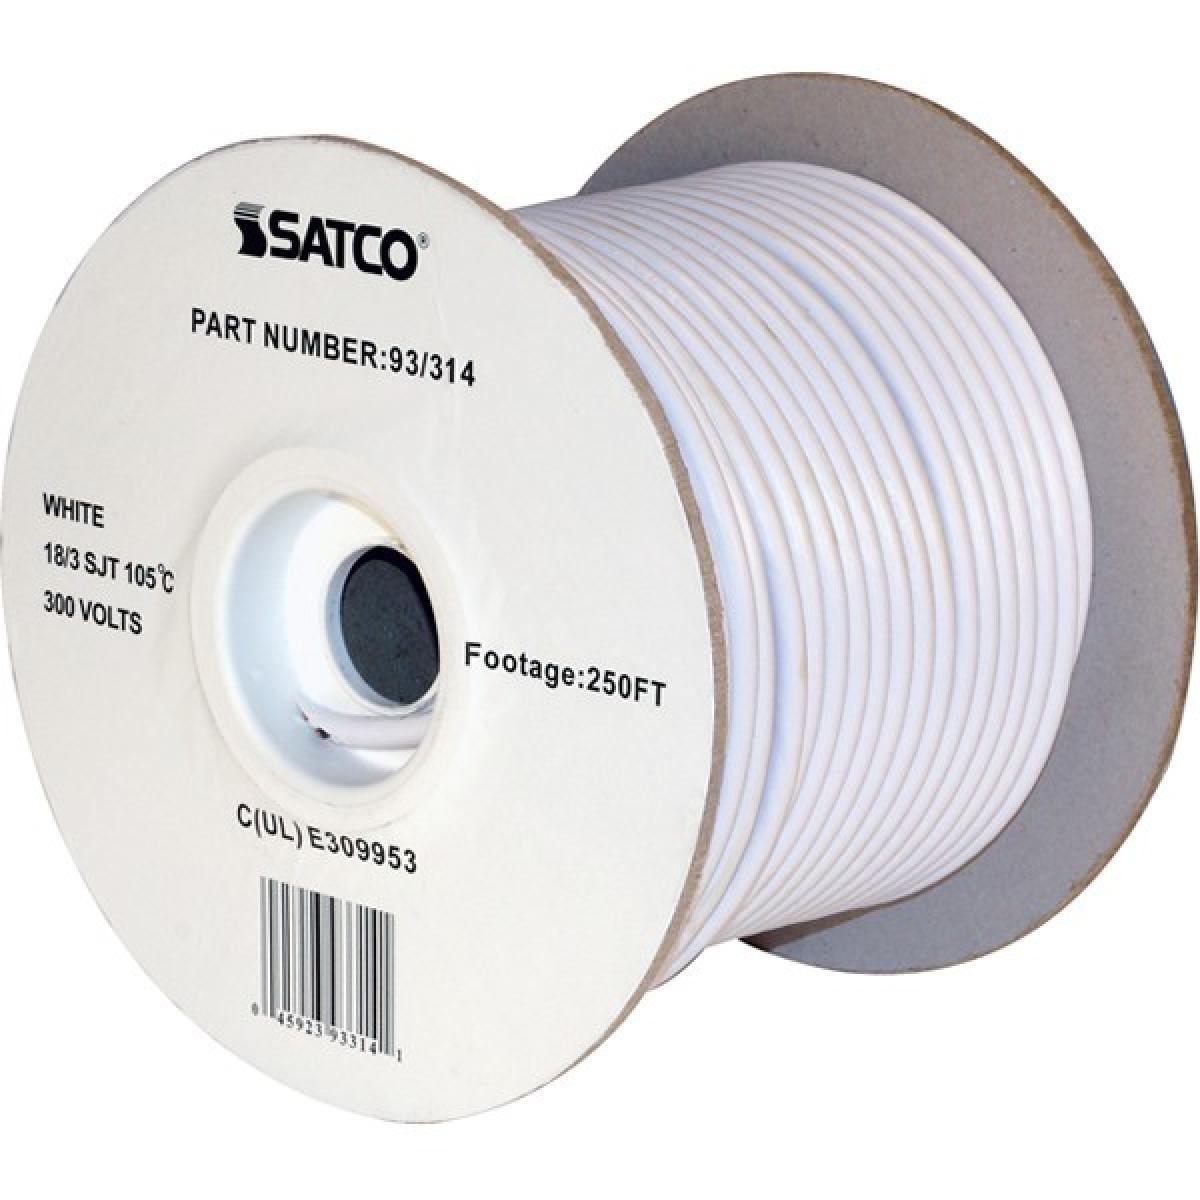 Satco 93-314 Pulley Bulk Wire 18/3 SJT 105C Pulley Cord 250 Foot/Spool White